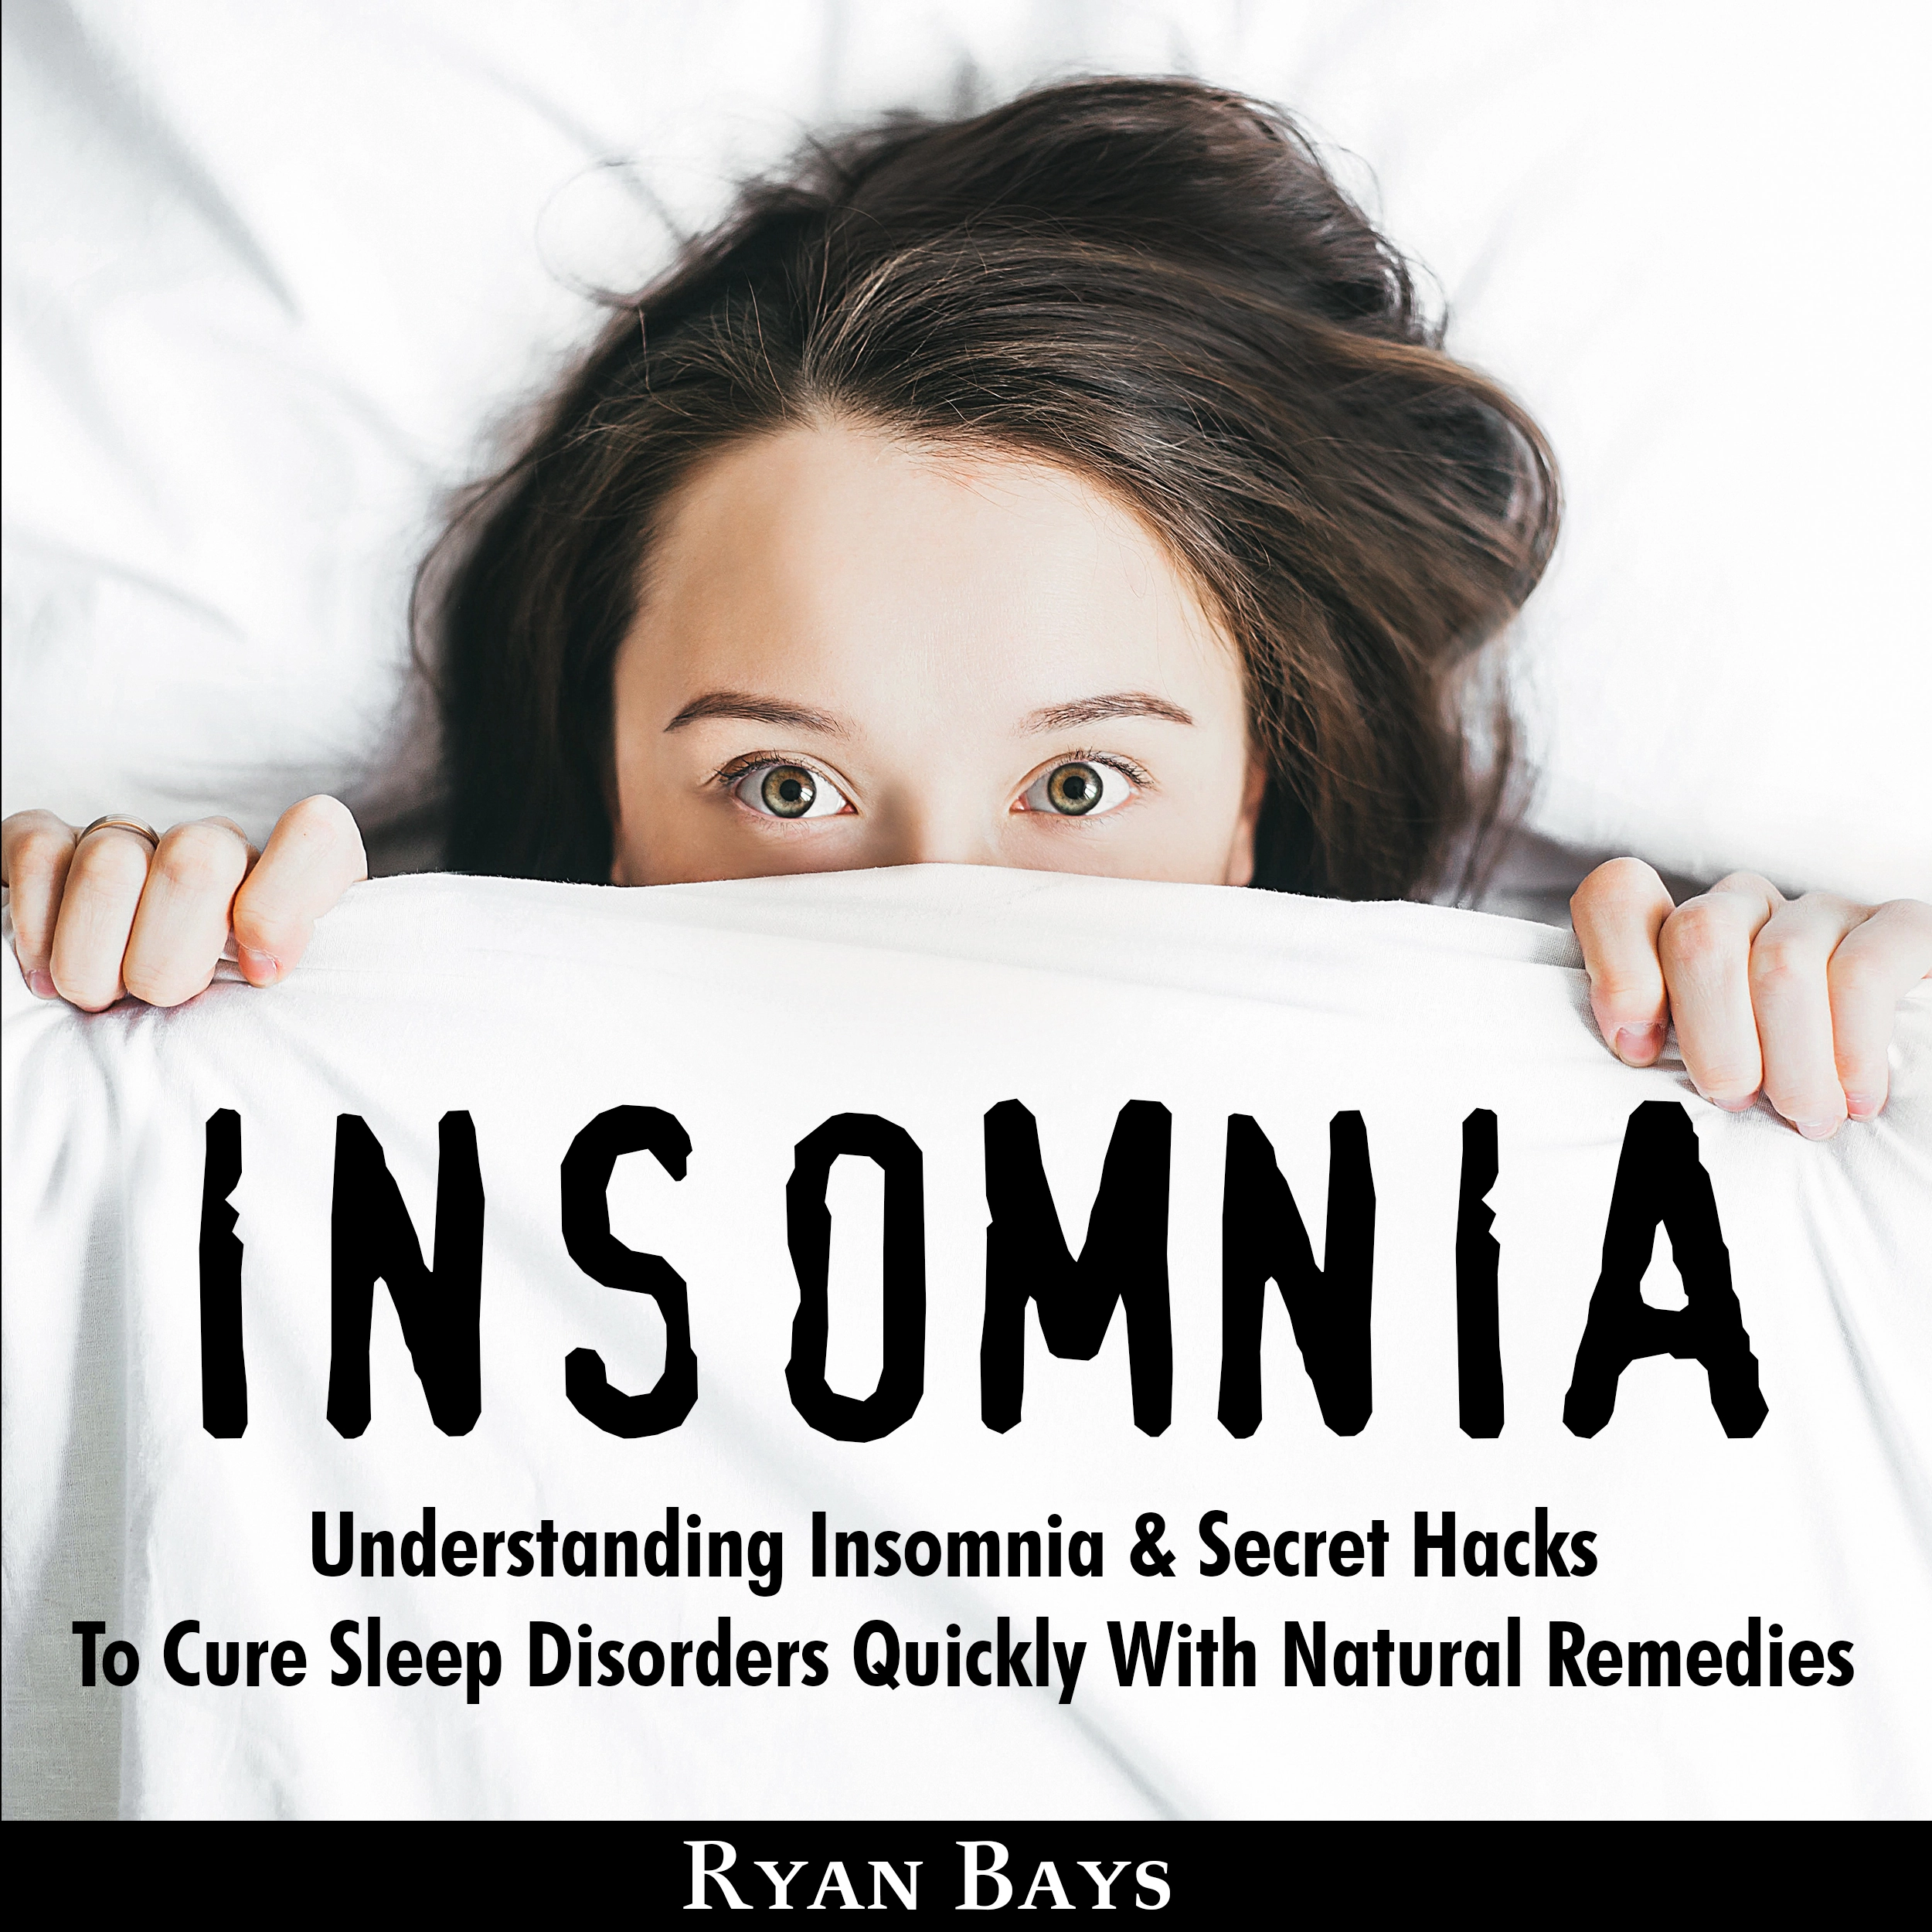 Insomnia: Understanding Insomnia & Secret Hacks To Cure Sleep Disorders Quiсklу With Natural Remedies Audiobook by Ryan Bays